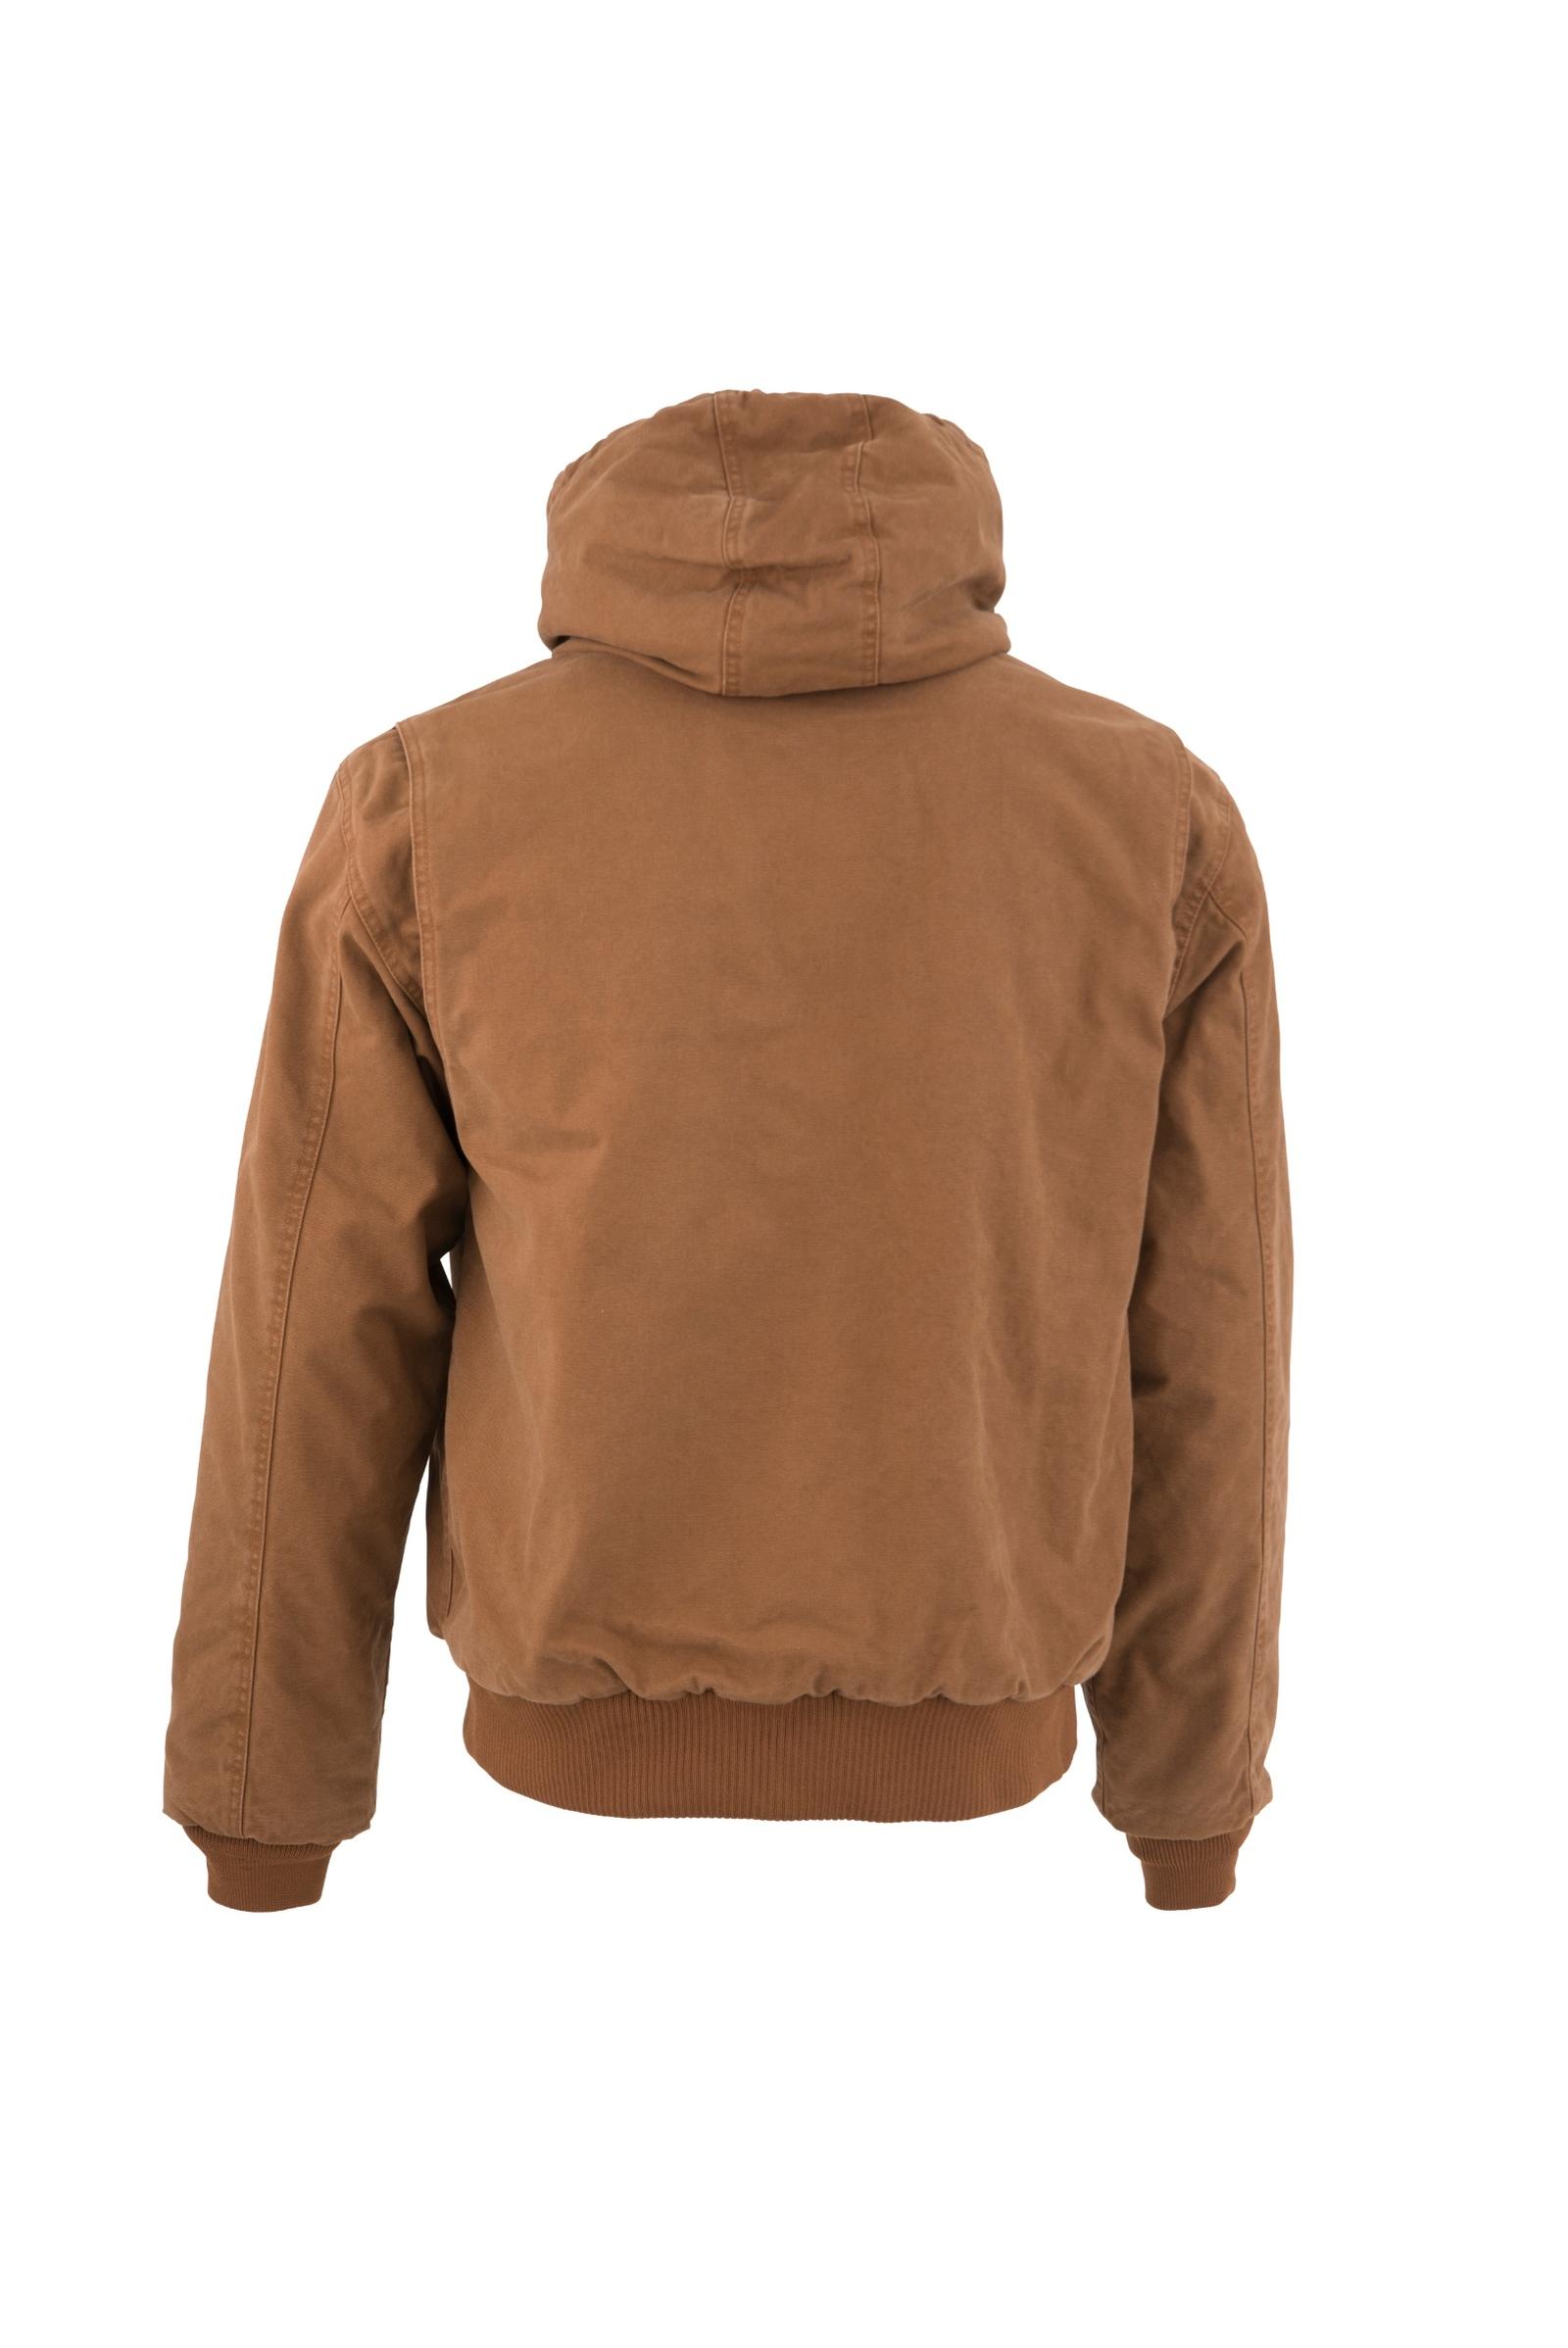 Noble Outfitters Men's Canvas Hooded Jacket